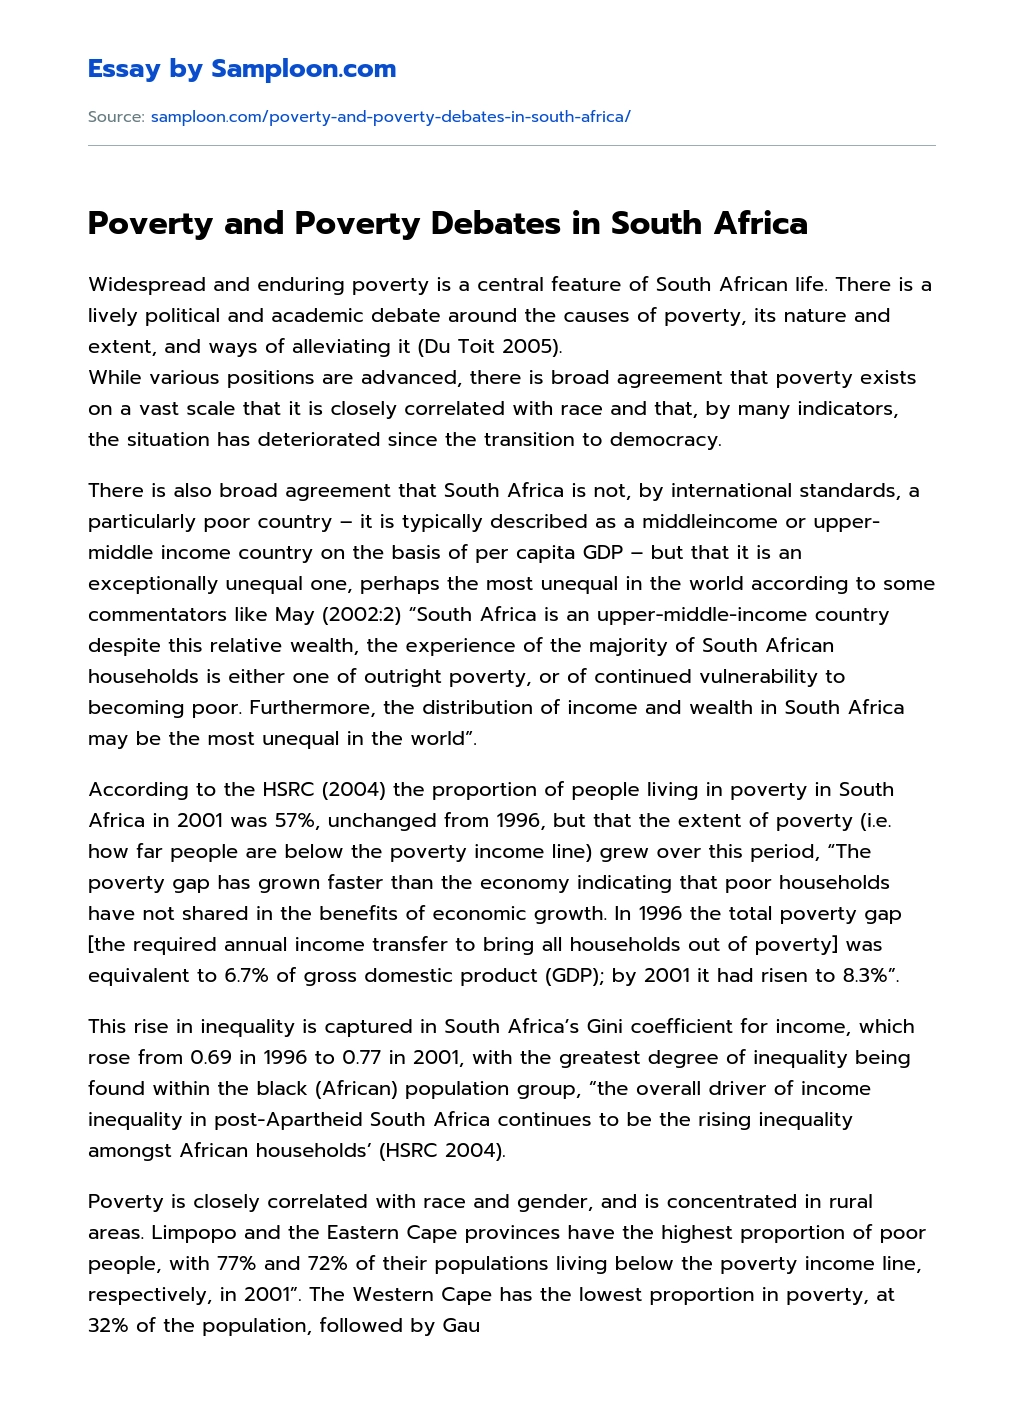 main causes of poverty in south africa essay